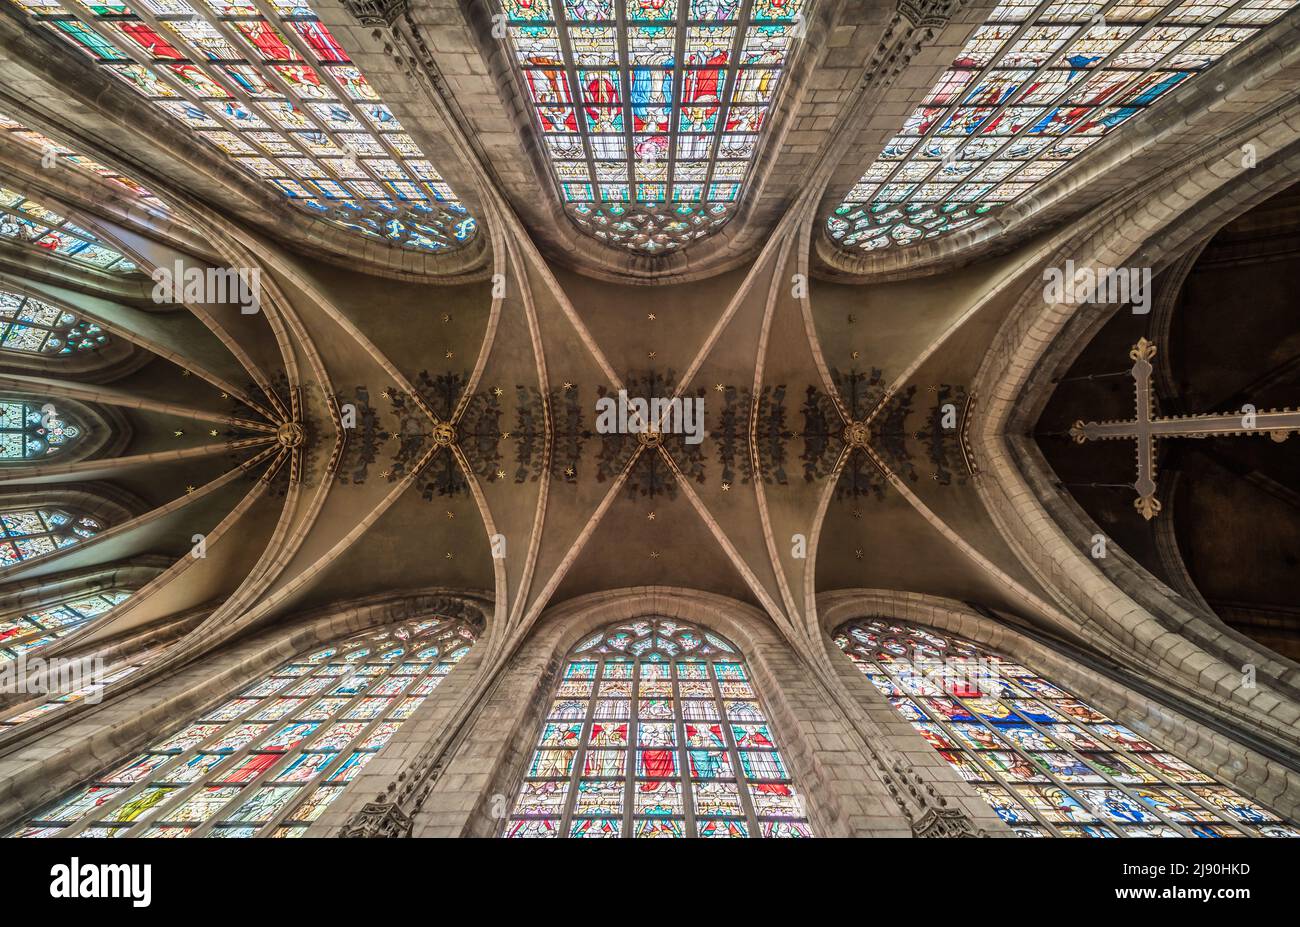 Anderlecht, Brussels Capital Region - 10 06 2019 Interior design of the gothic catholic church of Saint Guy and Saint Peter of Anderlecht Stock Photo